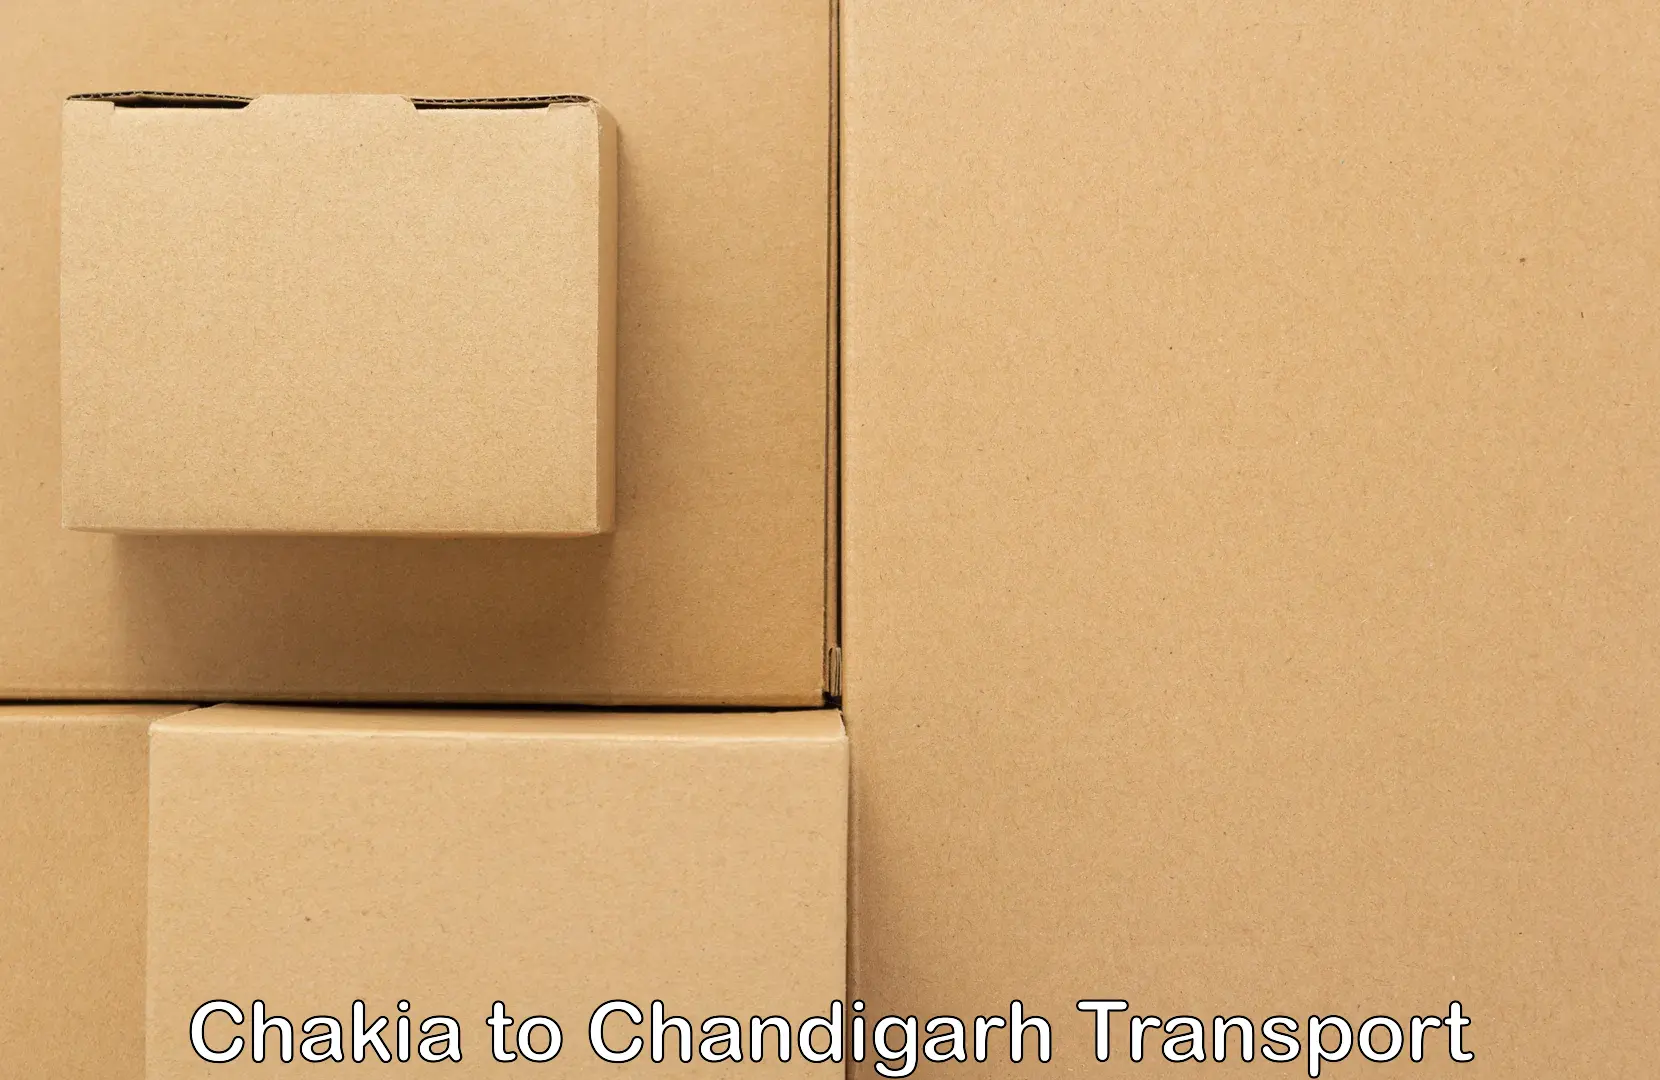 Air cargo transport services Chakia to Chandigarh